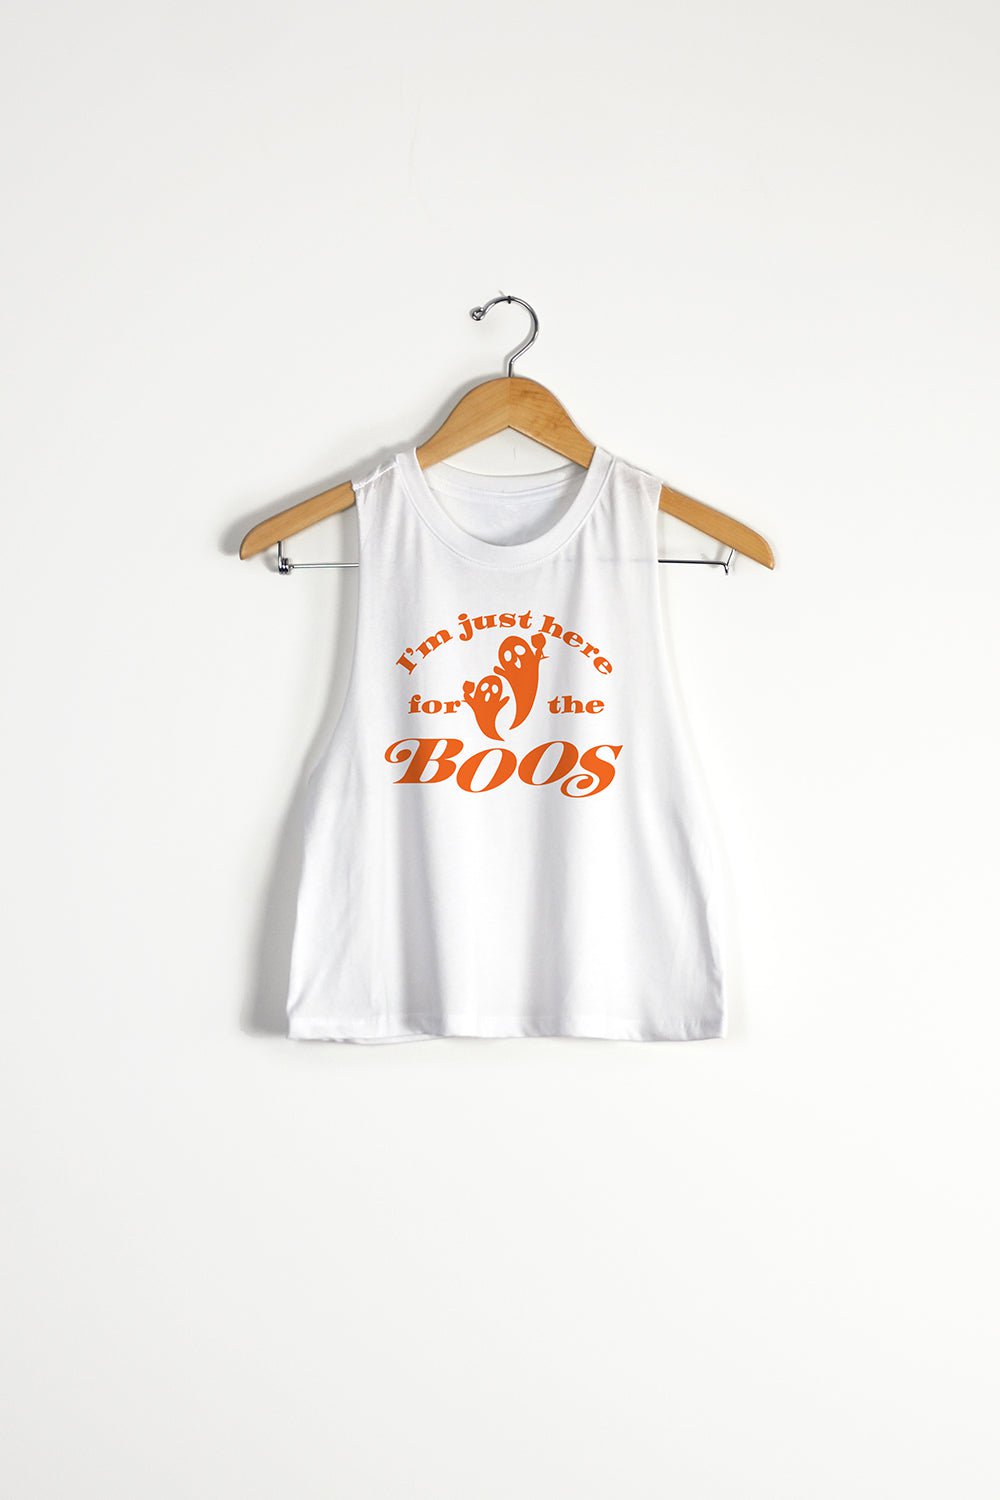 Sarah Marie Design Studio Crop Top Small / White Here for the Boos Racerback Crop Top